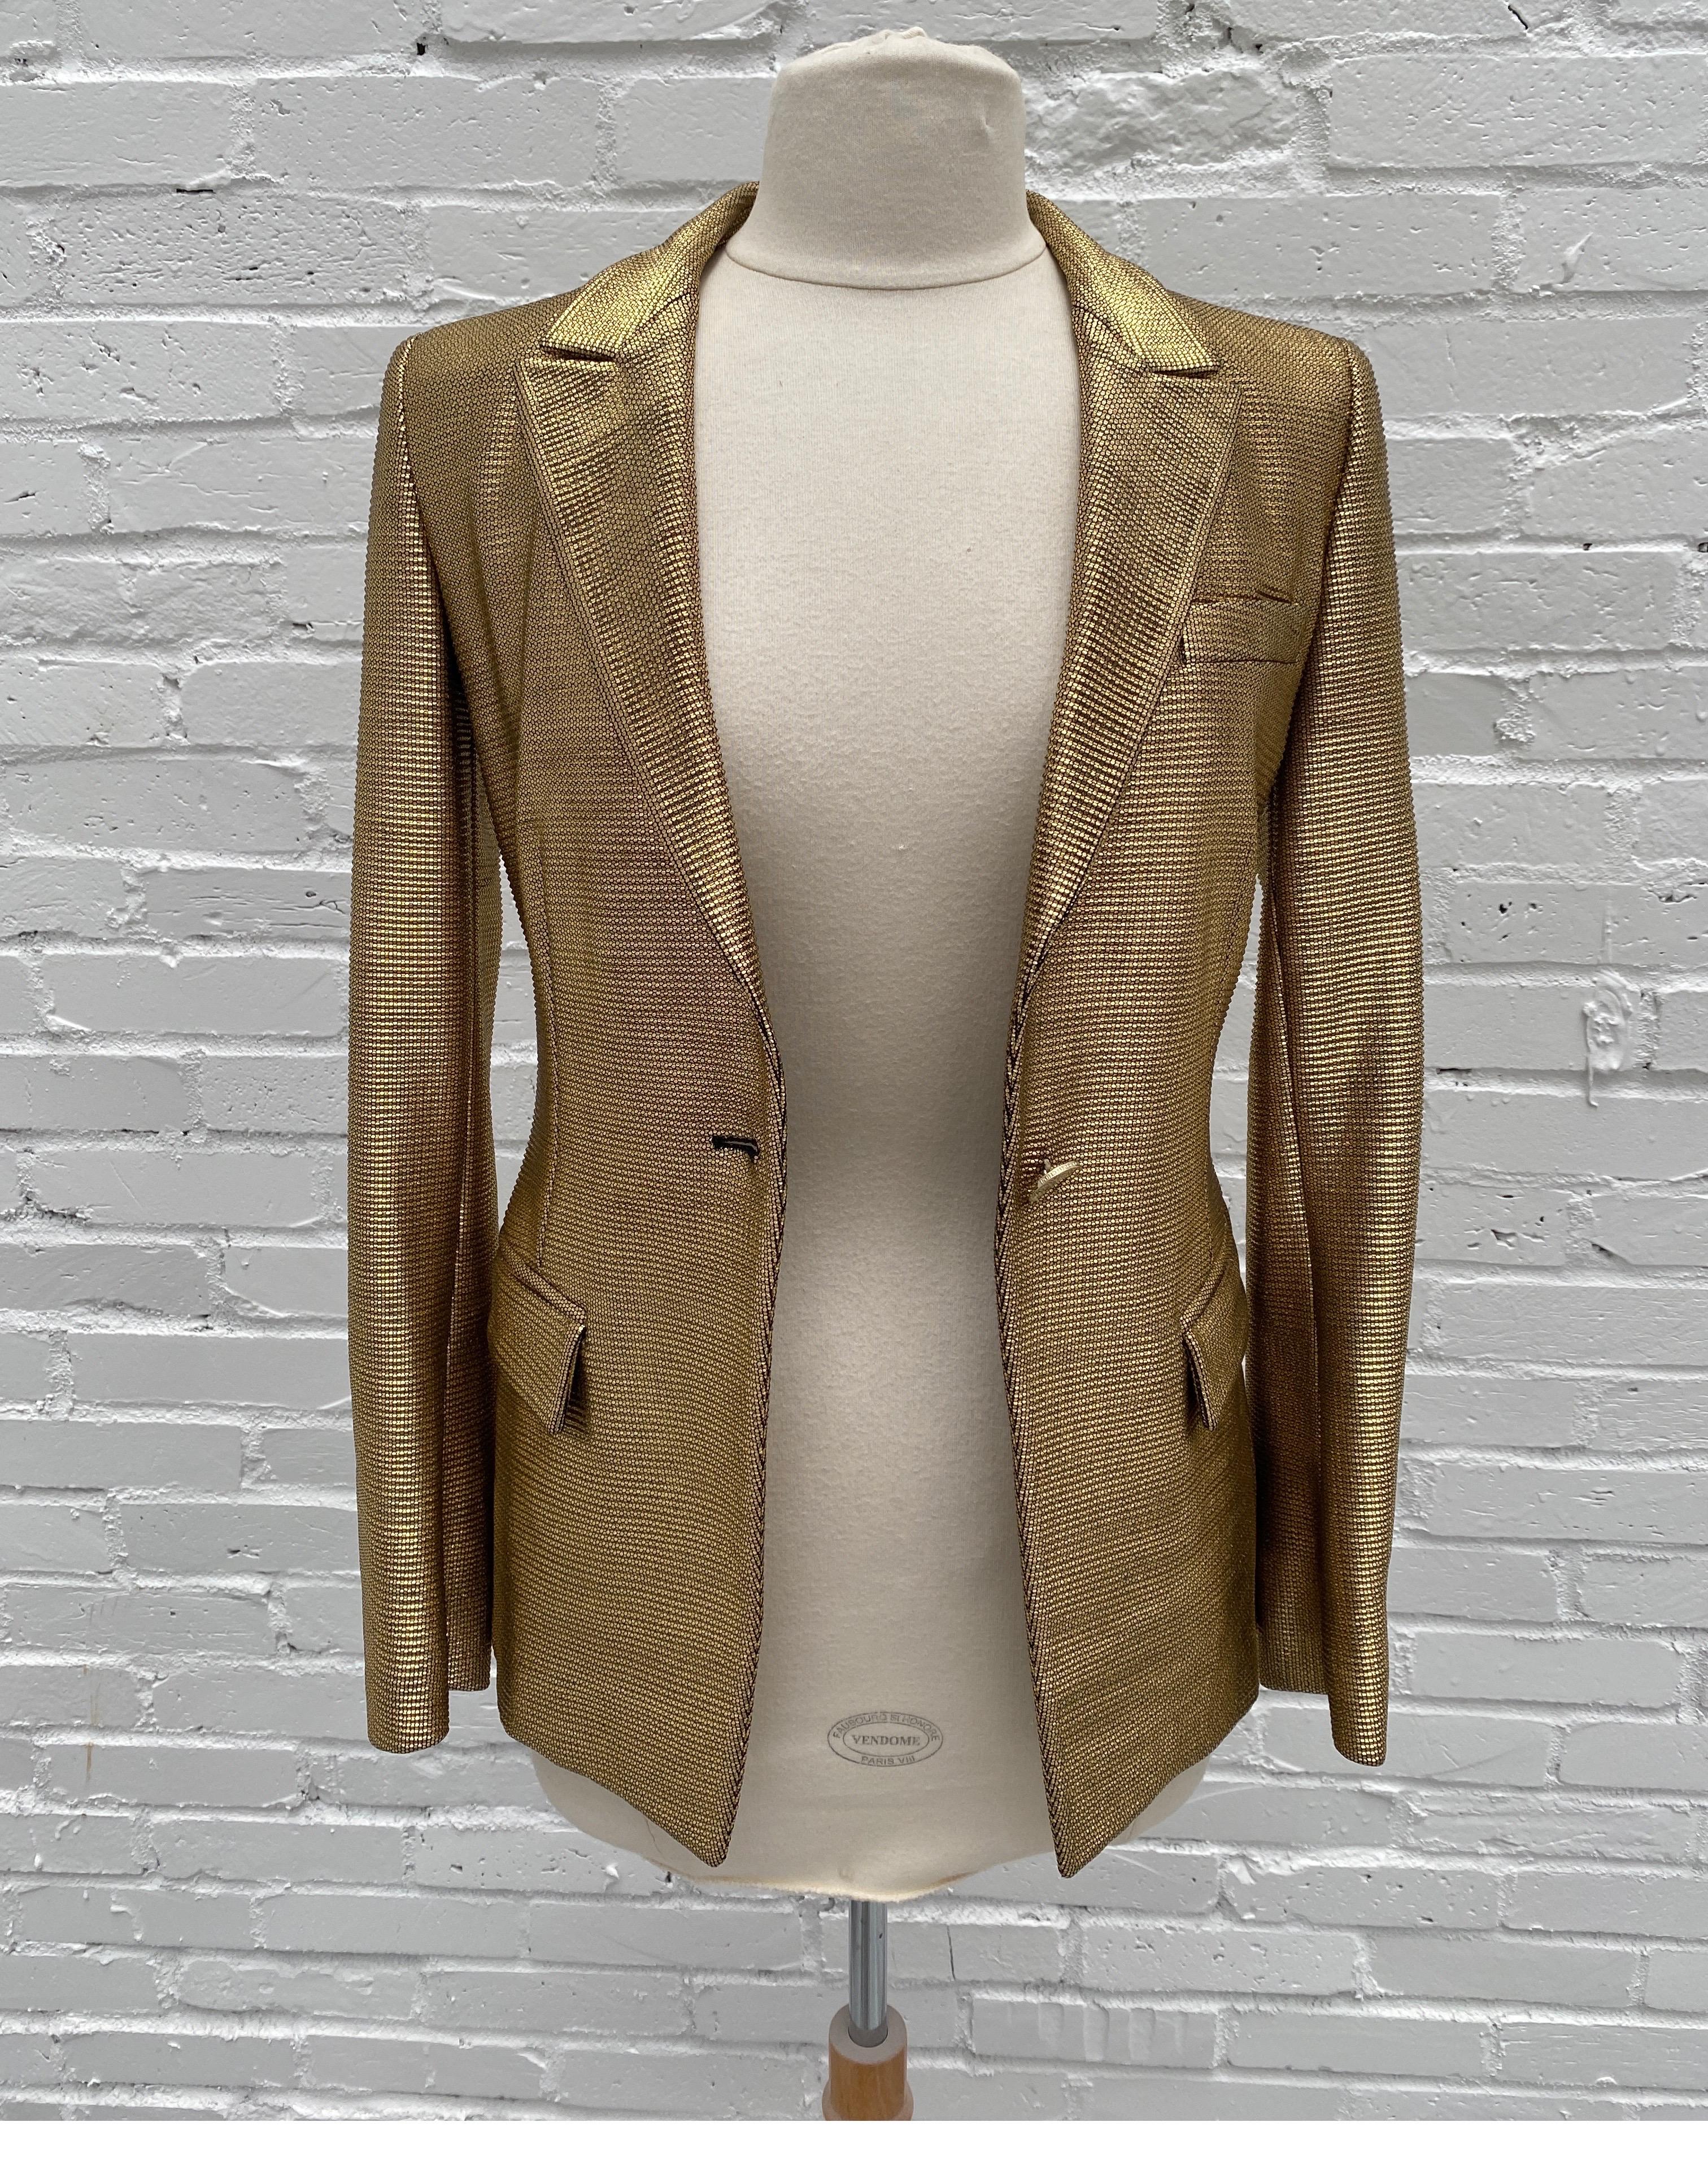 corduroy jacket with elbow patches